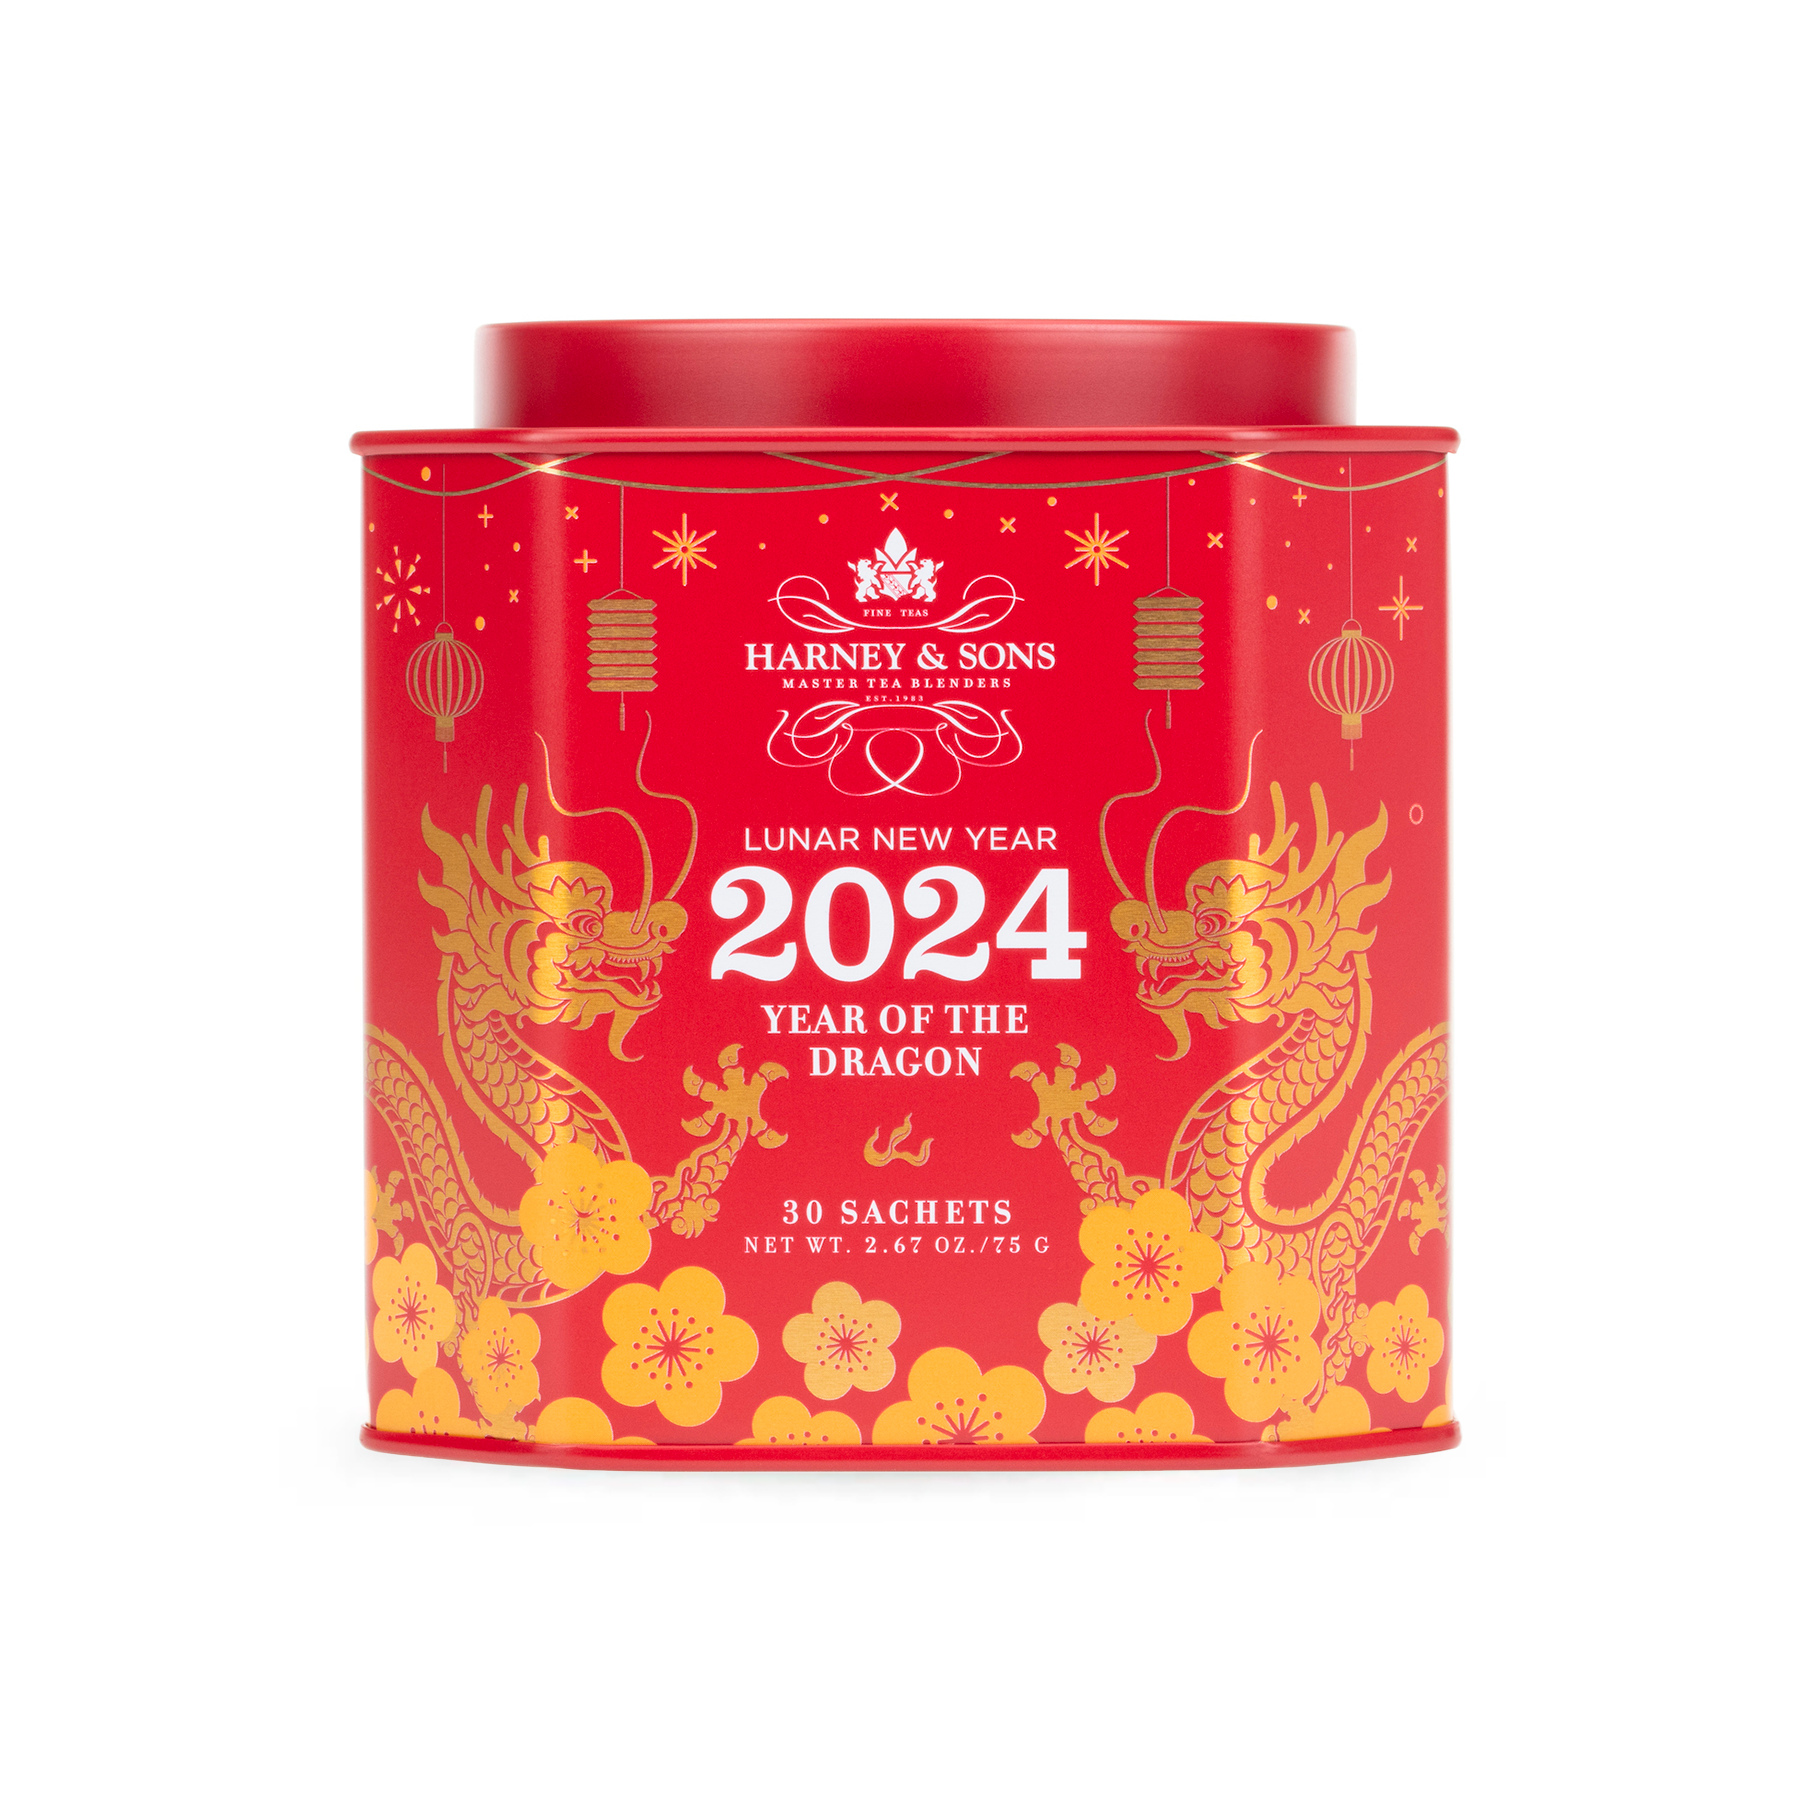 Lunar New Year 2024 - Year of the Dragon, 30 sachets